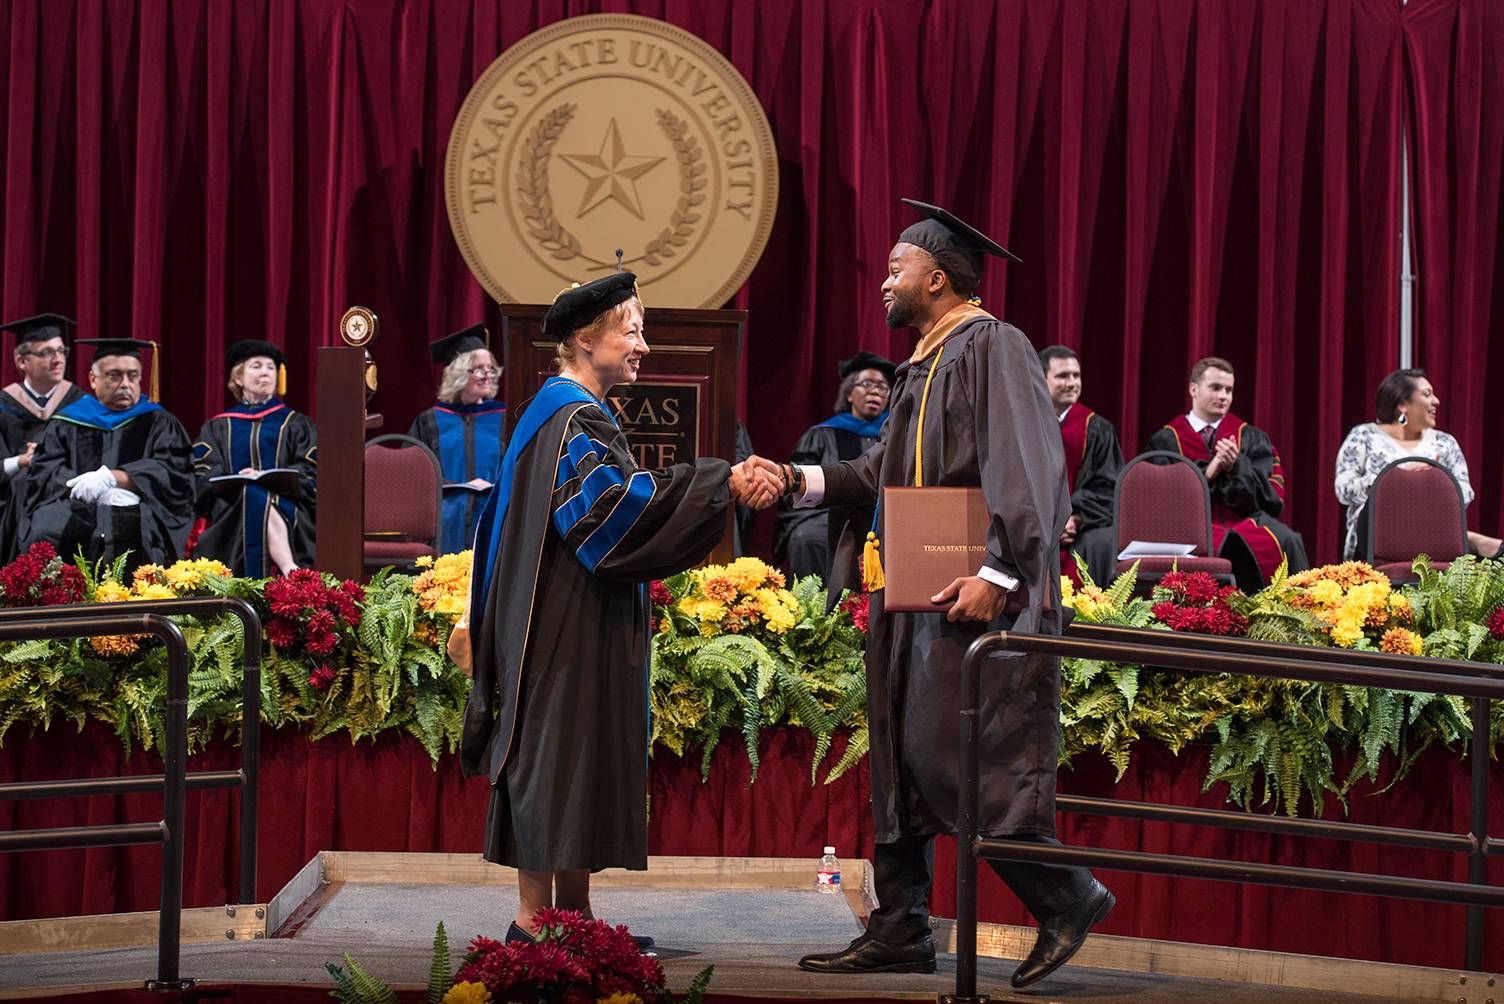 dr trauth shaking the hand of young man on stage during commencement